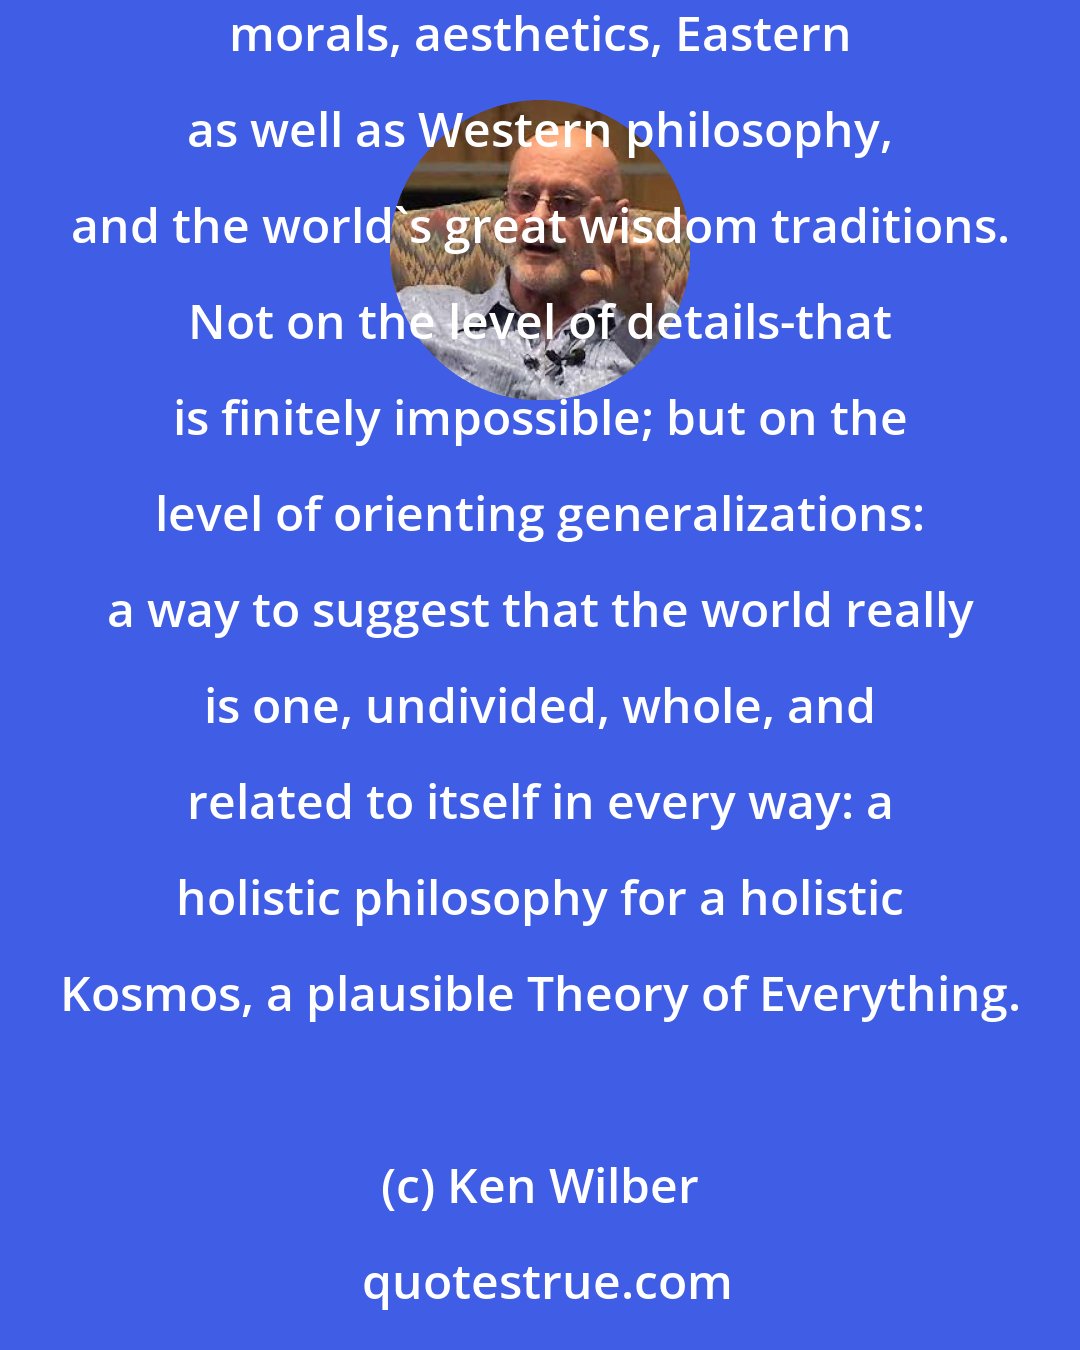 Ken Wilber: ..I sought a world philosophy-or an integral philosophy-that would believably weave together the many pluralistic contexts of science, morals, aesthetics, Eastern as well as Western philosophy, and the world's great wisdom traditions. Not on the level of details-that is finitely impossible; but on the level of orienting generalizations: a way to suggest that the world really is one, undivided, whole, and related to itself in every way: a holistic philosophy for a holistic Kosmos, a plausible Theory of Everything.